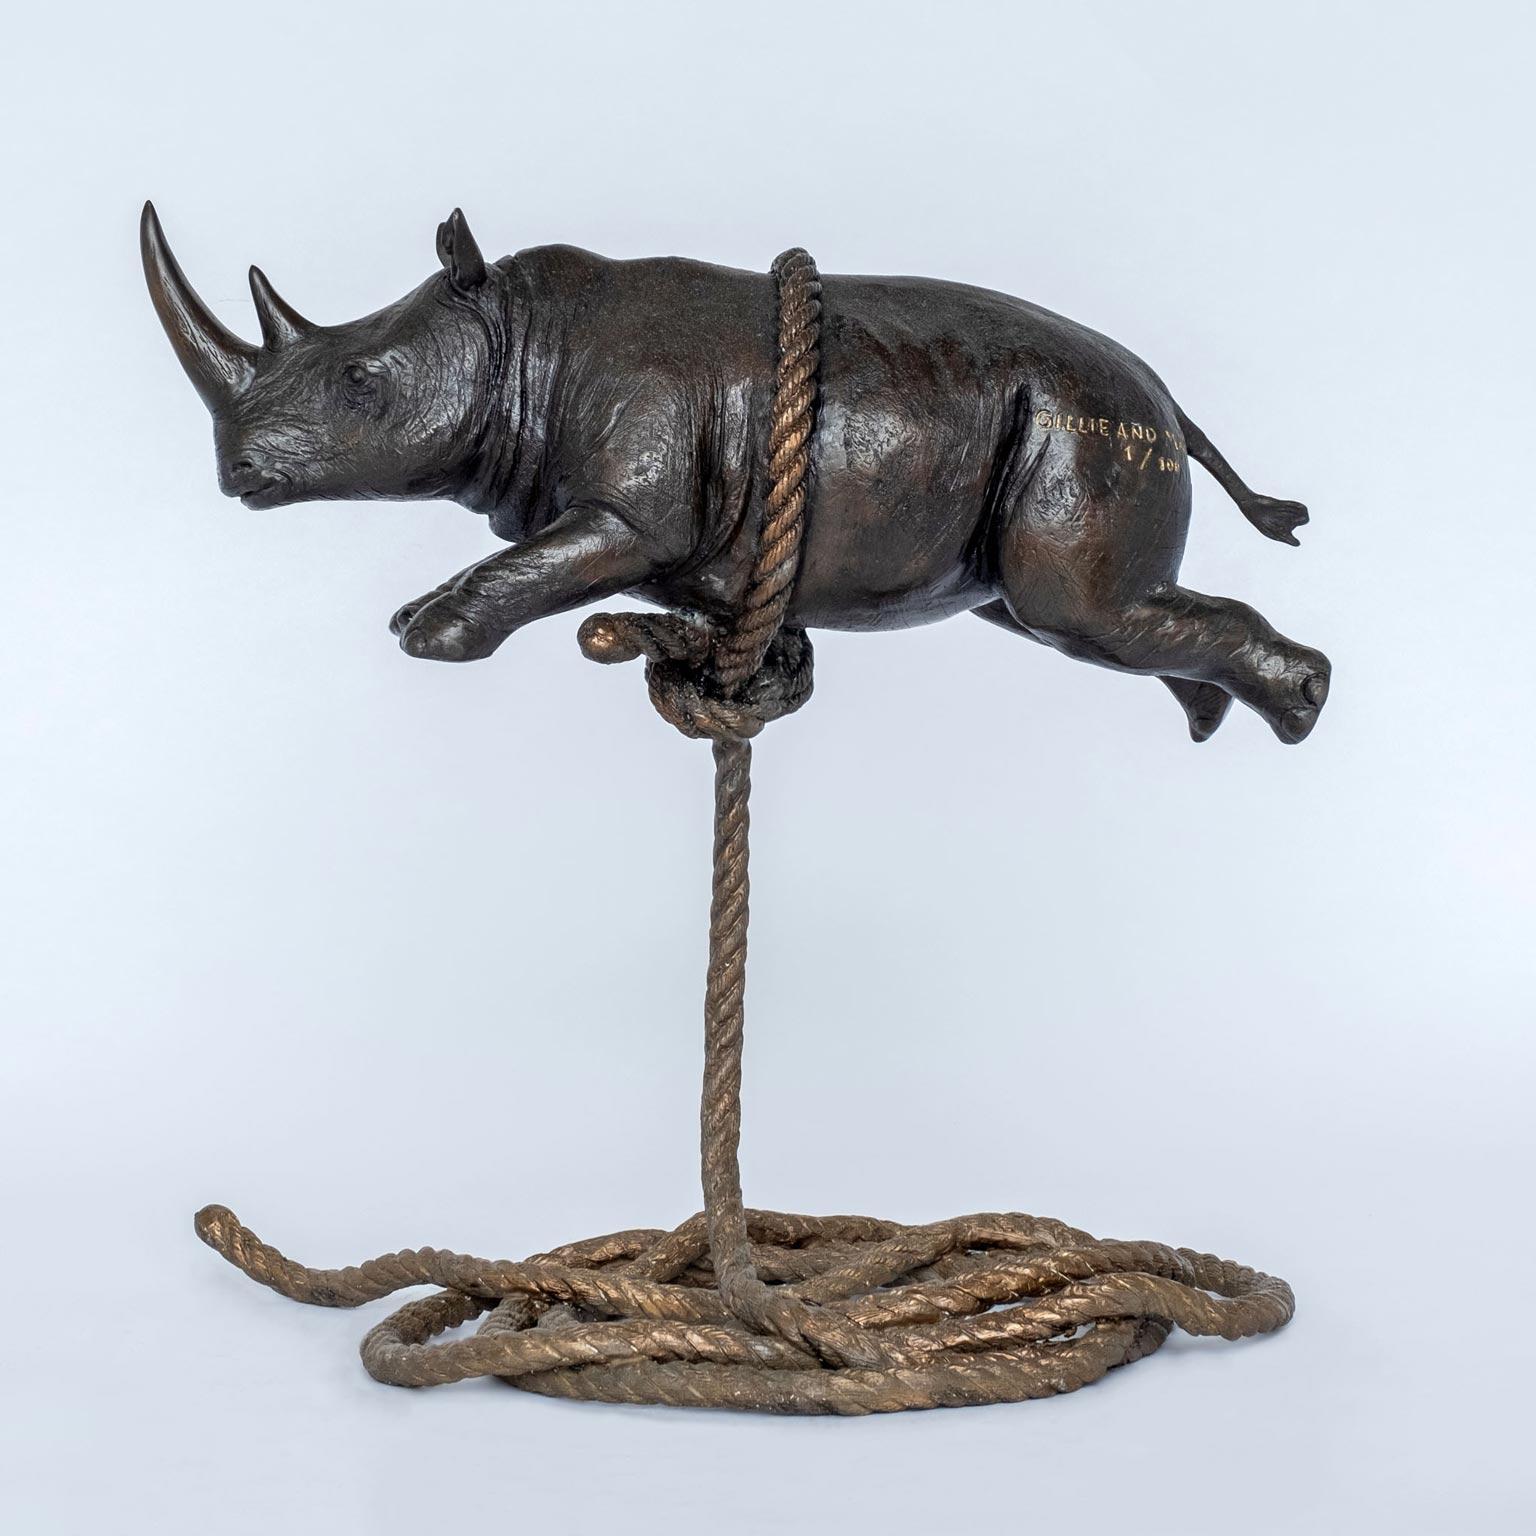 Authentic Bronze Rhino Flying High For The... Sculpture with by Gillie and Marc - Art by Gillie and Marc Schattner